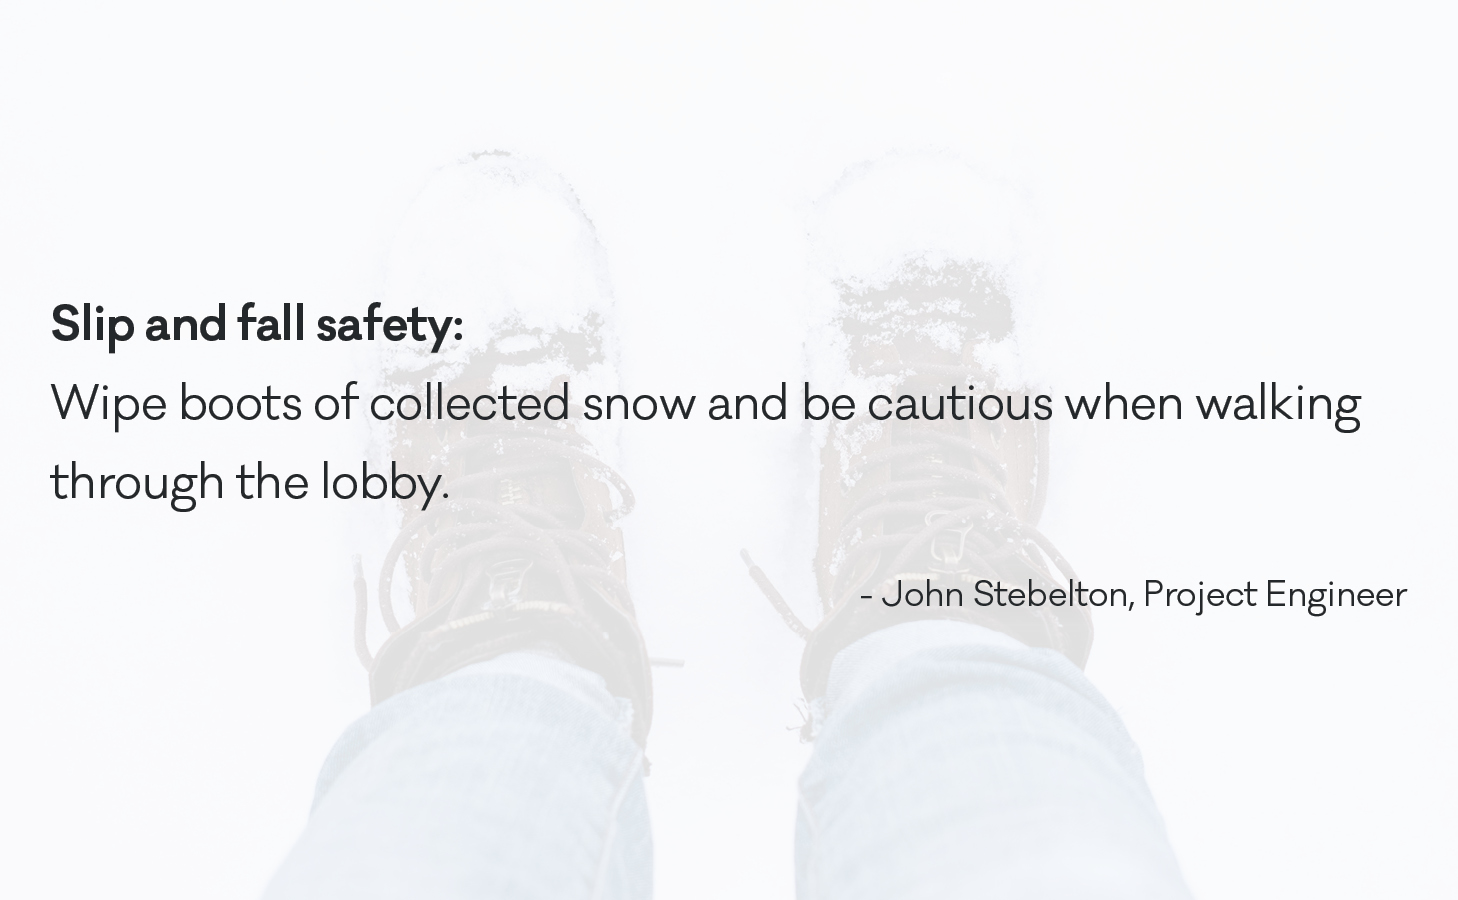 Wipe boots of collected snow and be cautious when walking through the lobby.